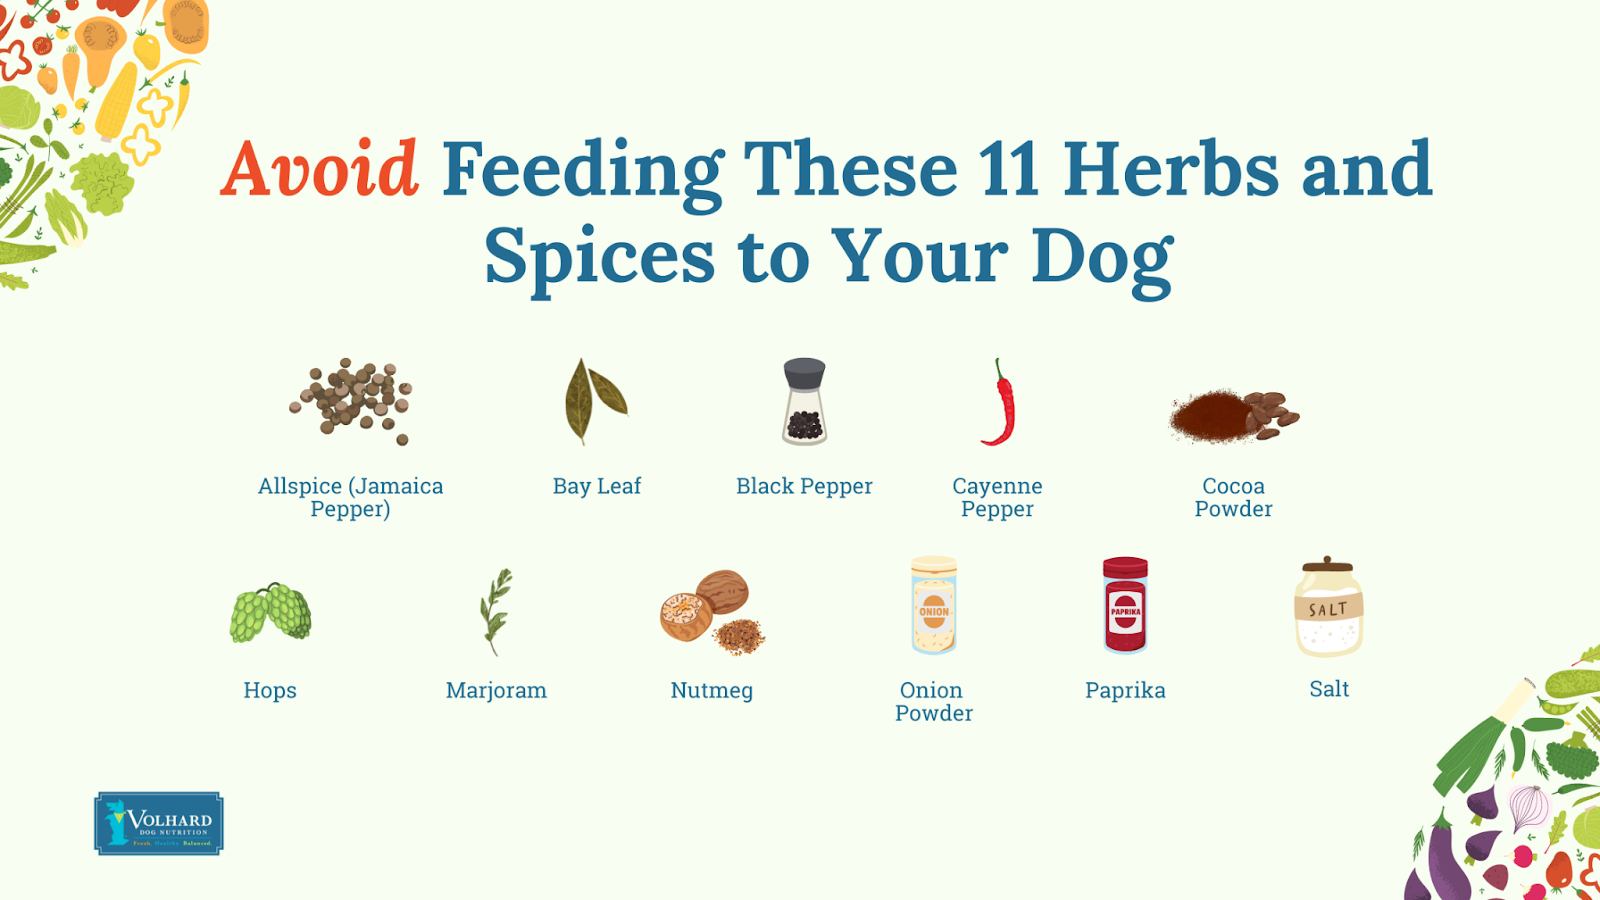 Avoid feeding these 11 herbs and spices to your dog